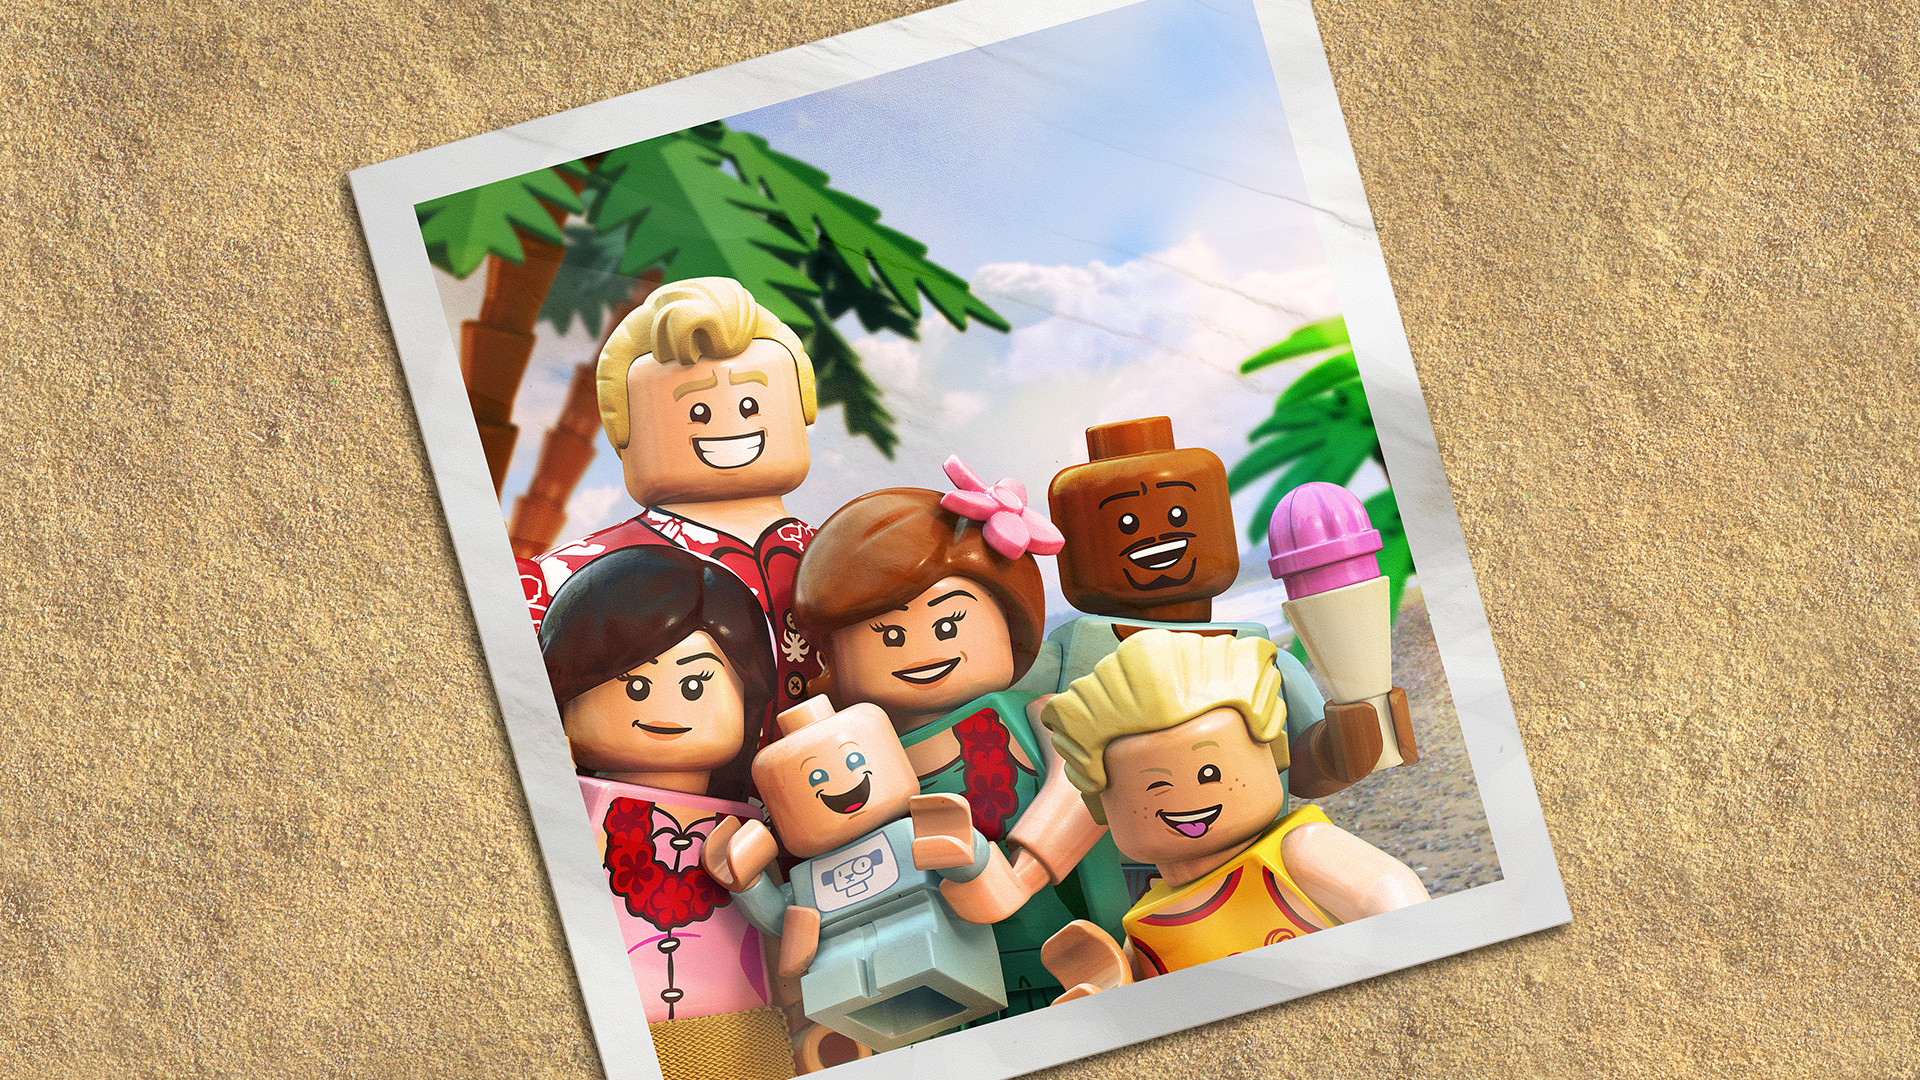 LEGO THE INCREDIBLES - Parr Family Vacation Character Pack DLC EU PS4 CD Key $1.12